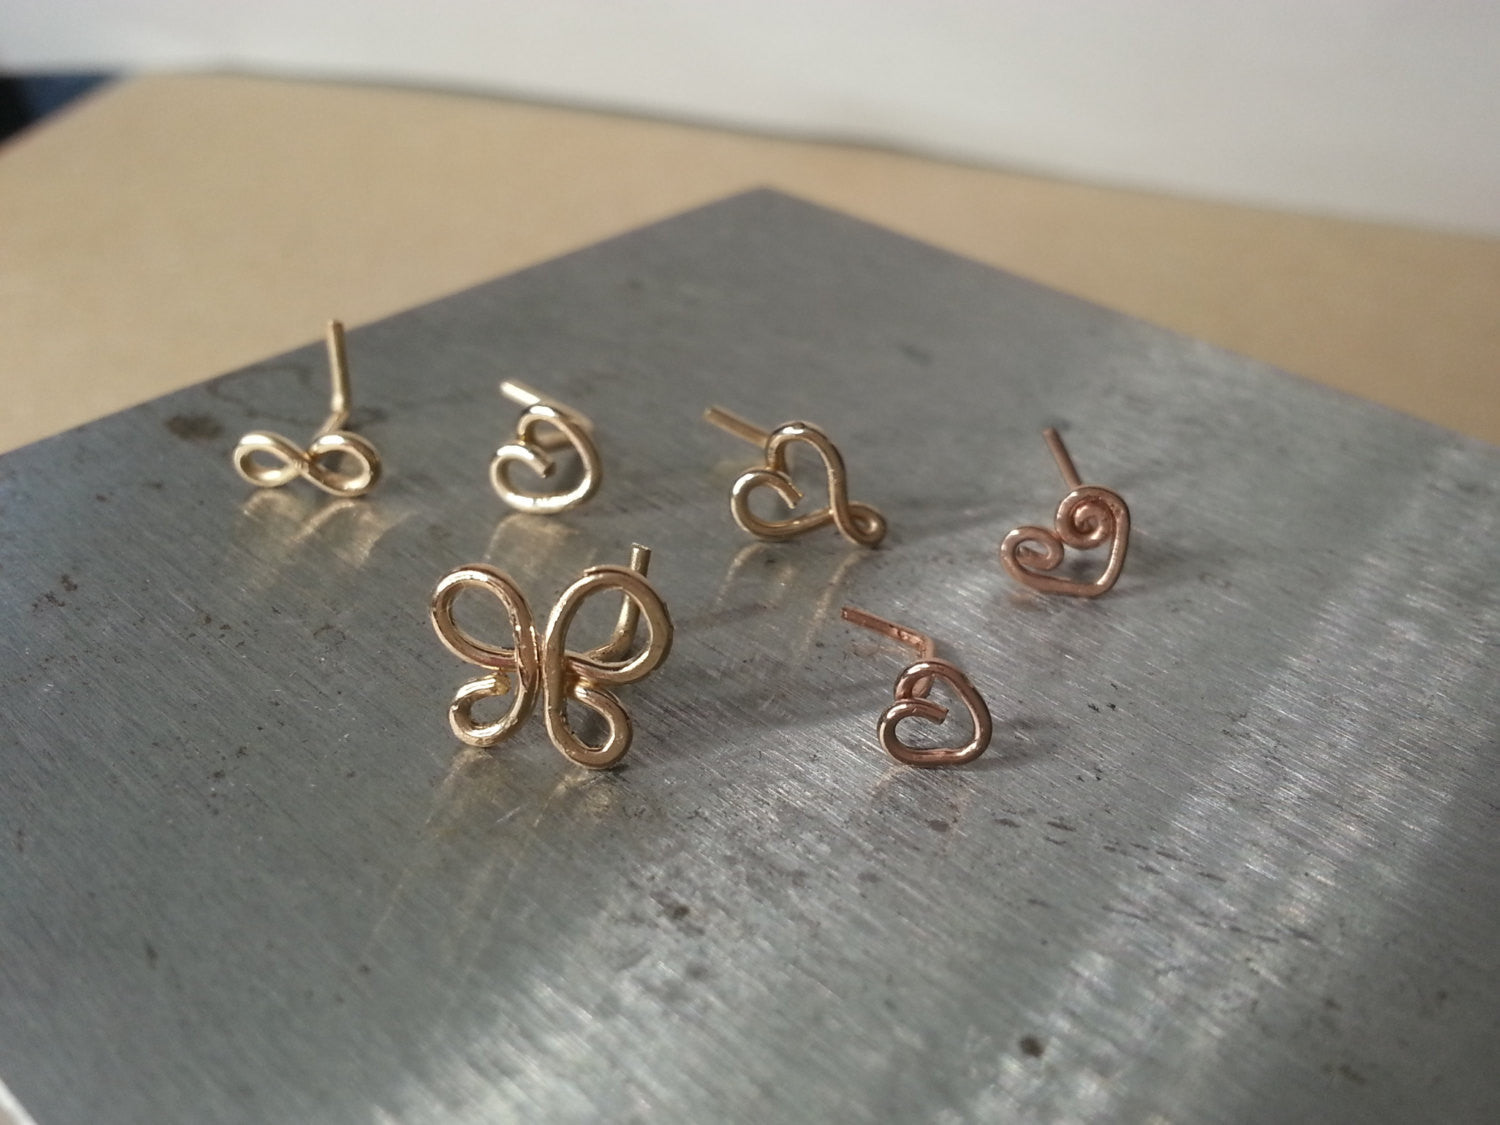 Nose Stud VARIETY VALENTINES Heart Cartilage 20 gauge 20ga 14k Yellow, White, Pink Rose Solid / Gold Filled / Silver Earring Helix Tragus